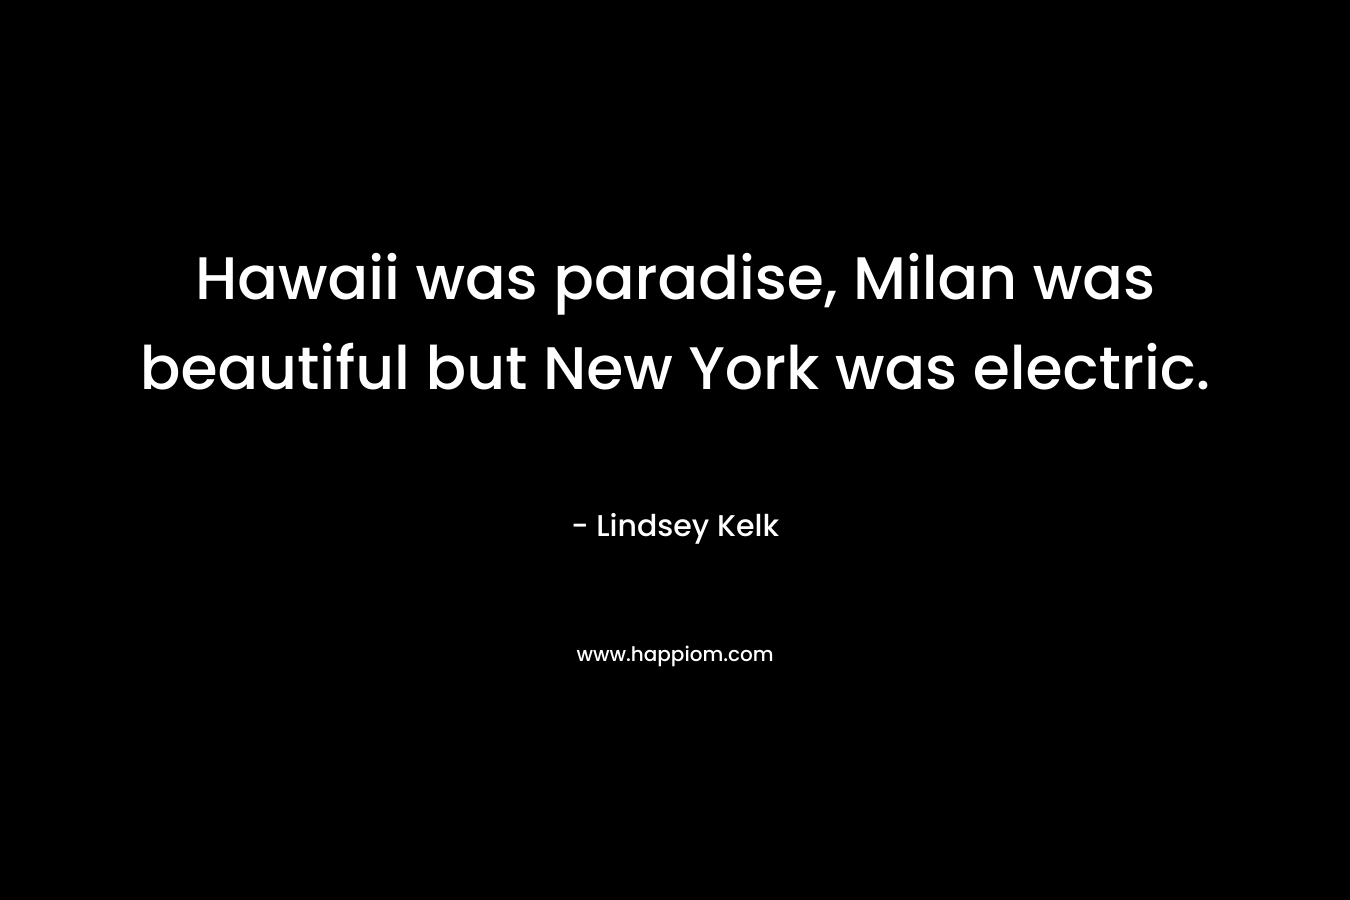 Hawaii was paradise, Milan was beautiful but New York was electric.